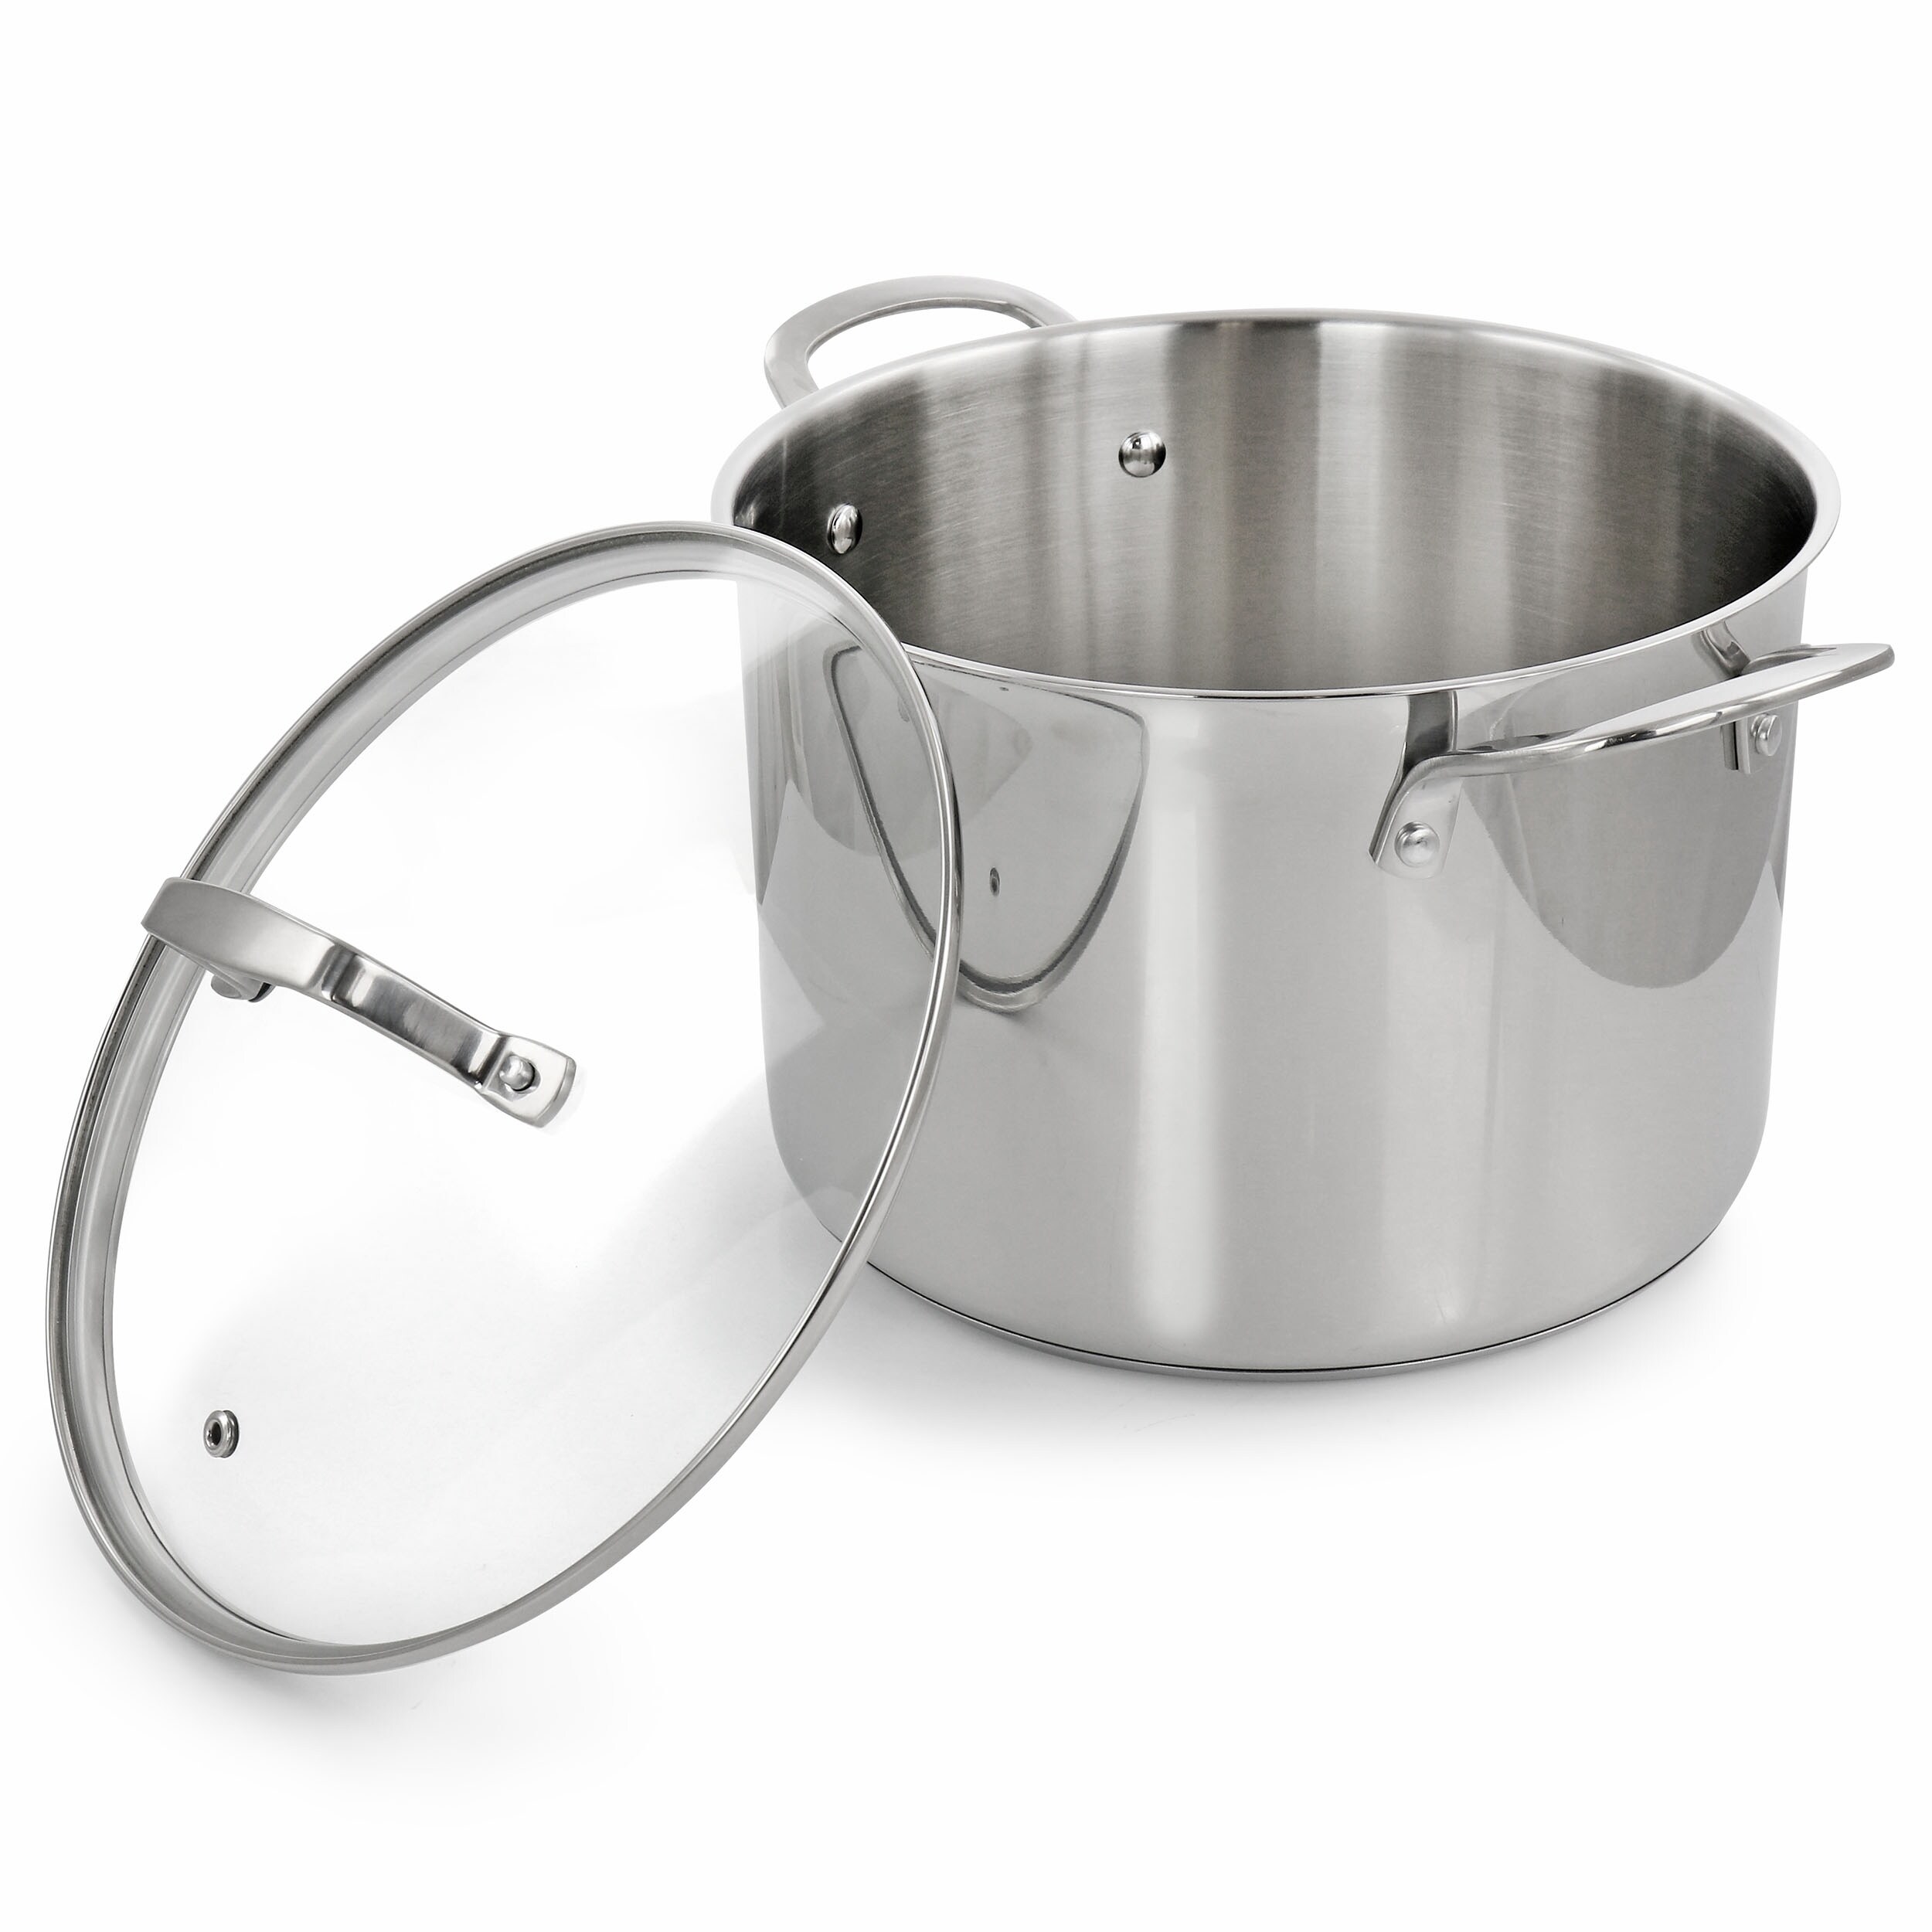 https://ak1.ostkcdn.com/images/products/is/images/direct/e1d76dcc0a97e96a4f16862018b5a377b2507160/Martha-Stewart-8-Quart-Castelle-Stainless-Steel-Dutch-Oven-with-Lid.jpg